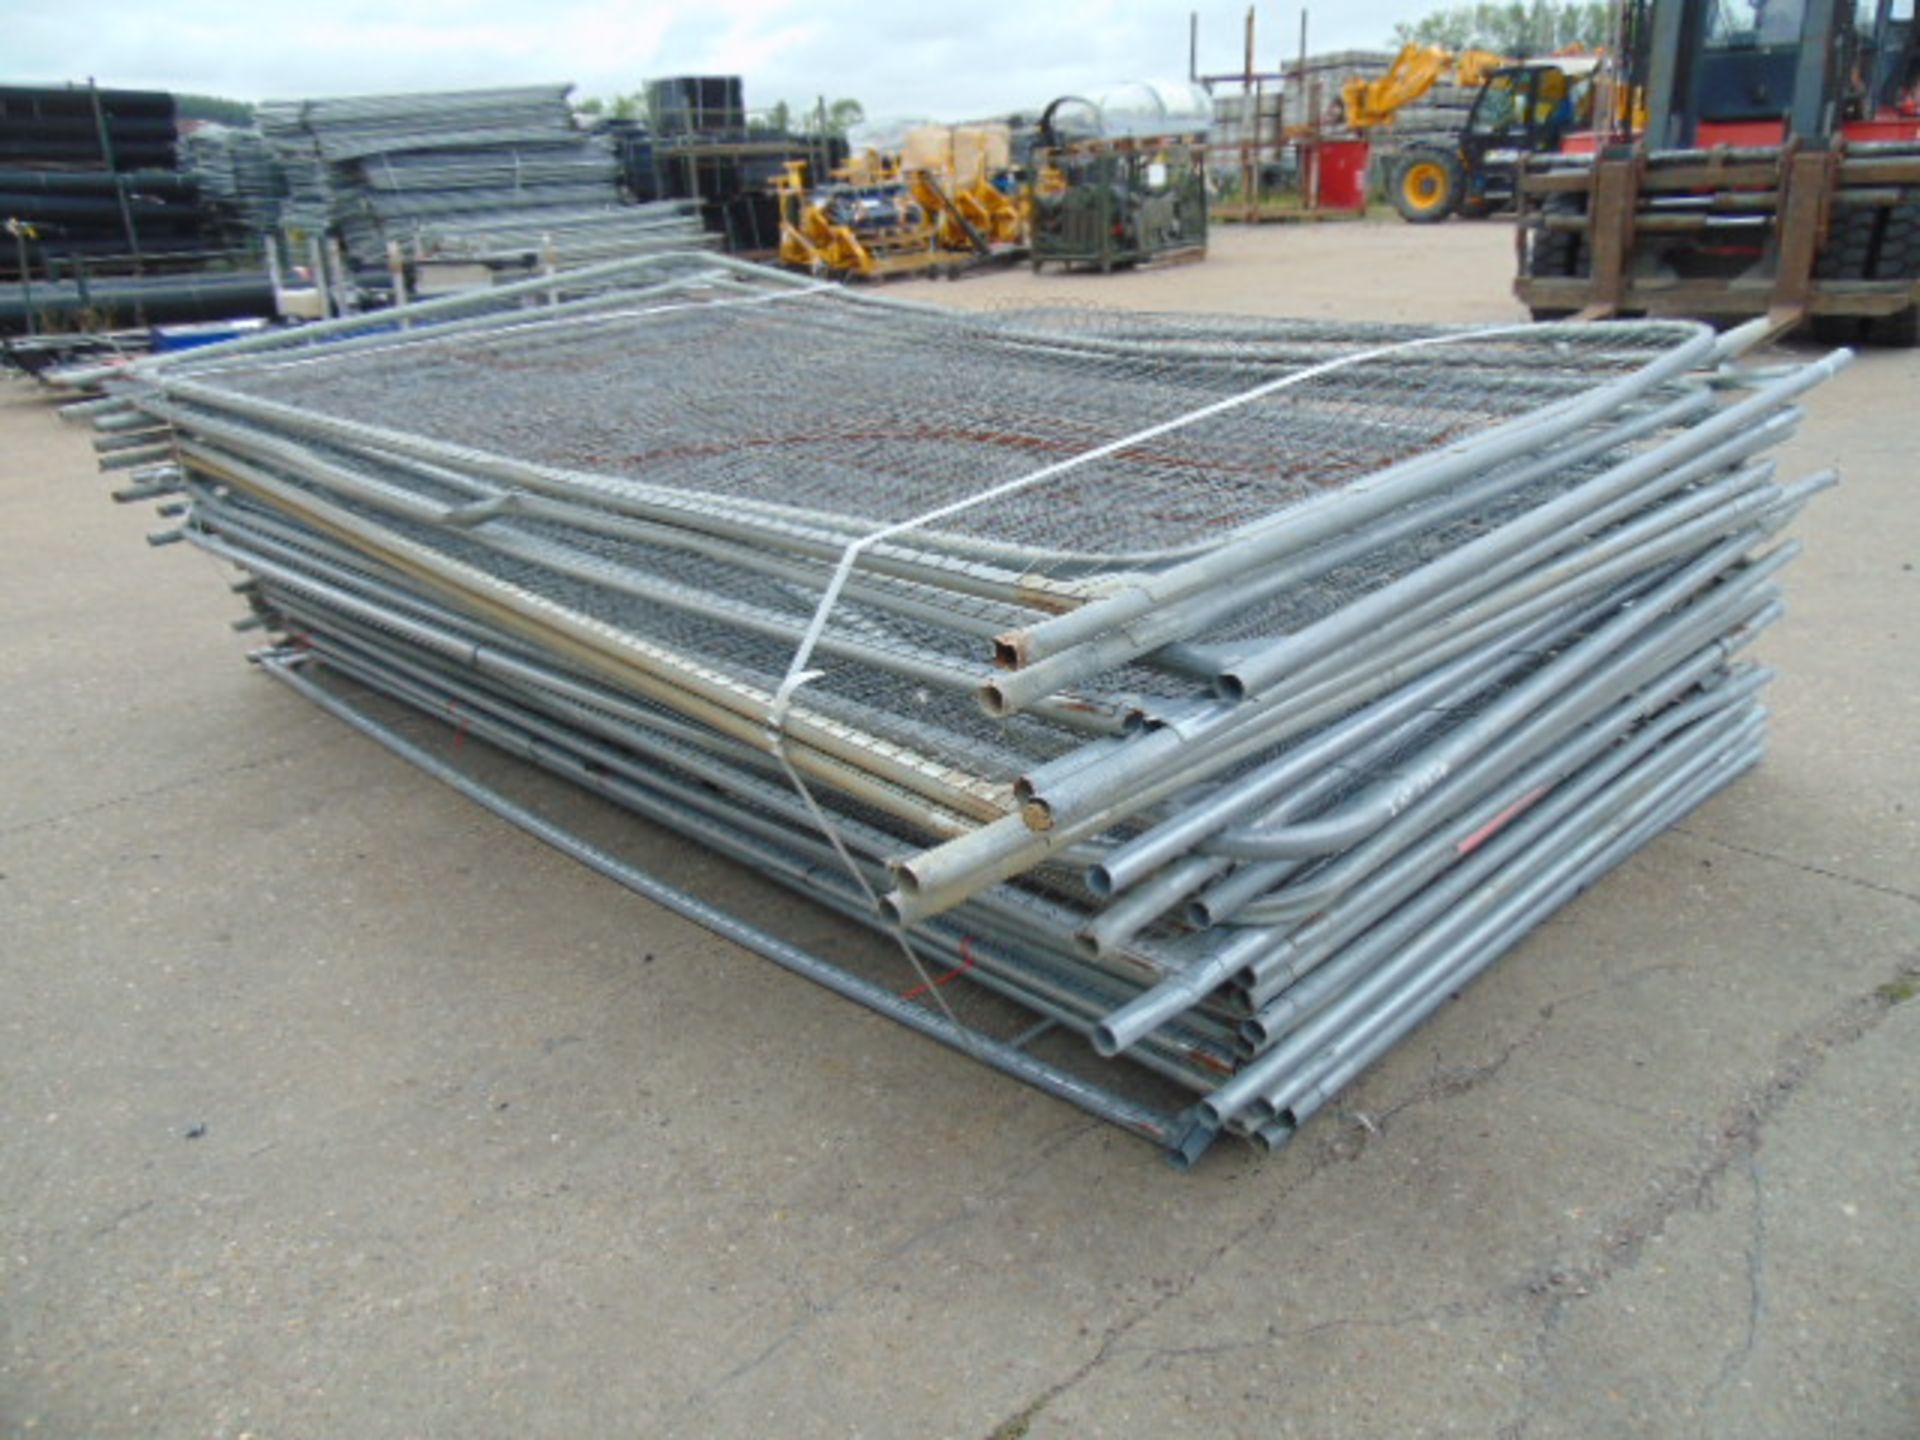 30 x Heras Style Galvanised Fencing Panels 3.5m x 2m - Image 5 of 5